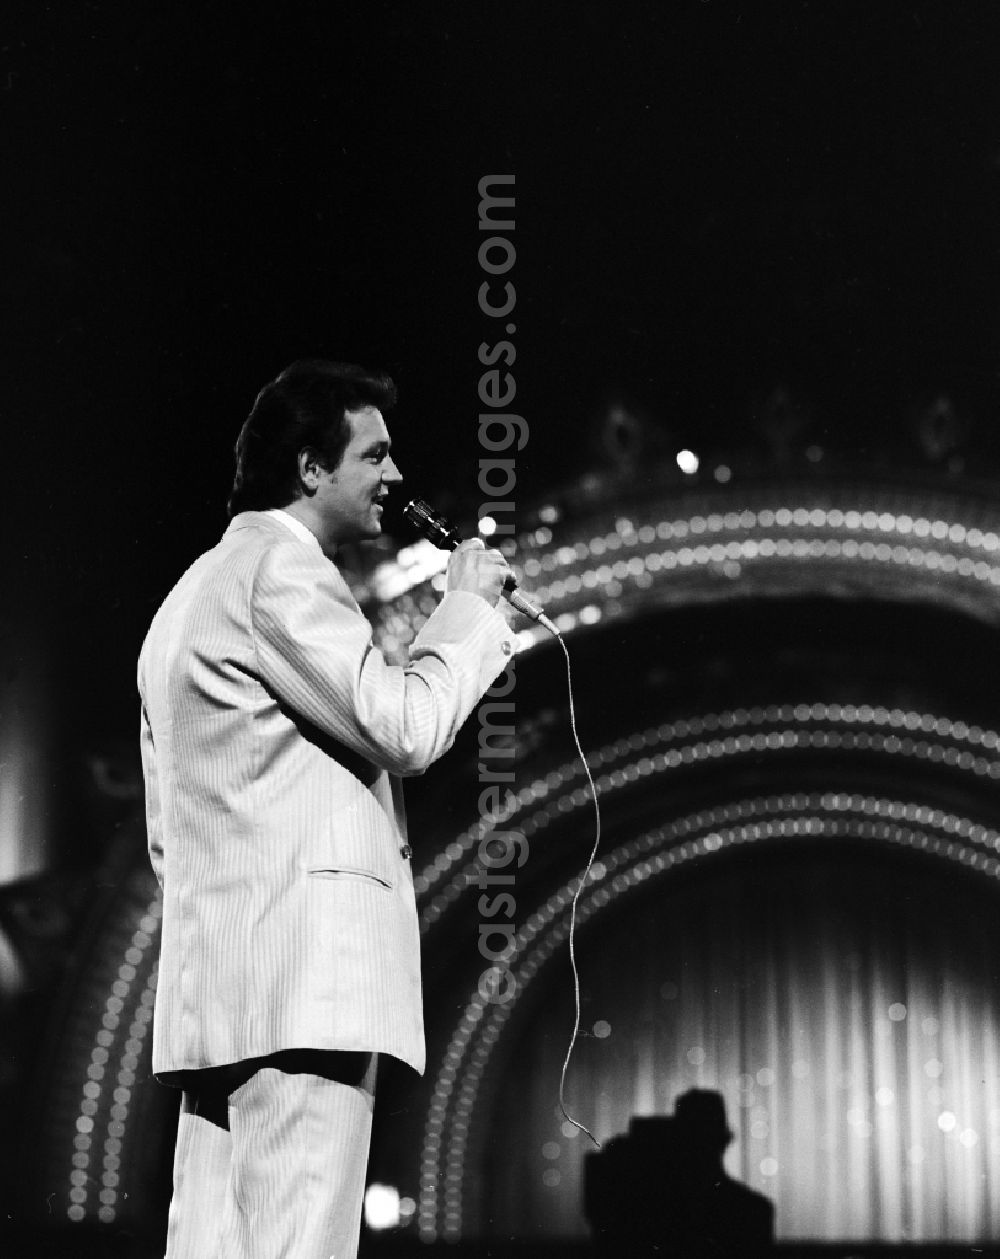 GDR image archive: Berlin - The crooner Gerd Christian in an appearance on the Saturday evening show Ein Kessel Buntes at the Friedrichstadtpalast in Berlin, the former capital of the GDR, the German Democratic Republic